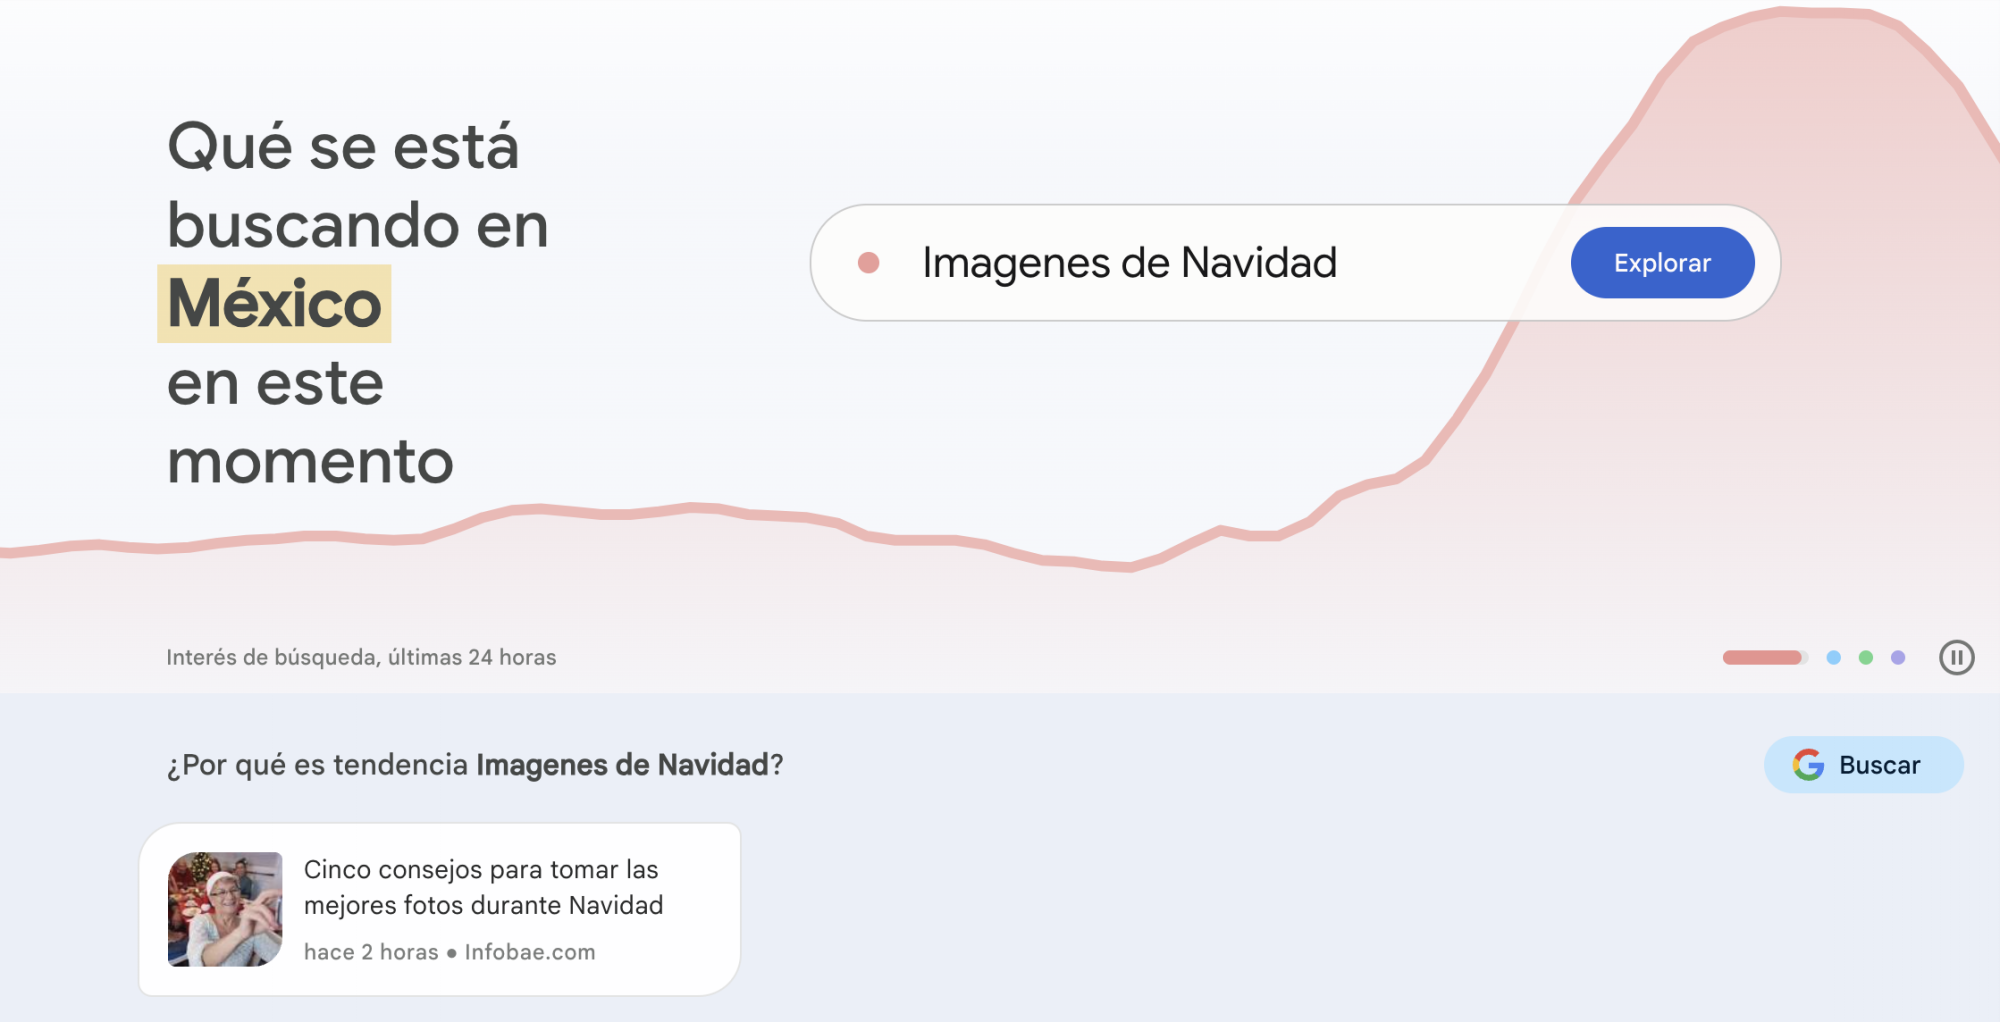 $!On the eve of Christmas Eve and Christmas, what is the most searched thing on Google from Mexico?